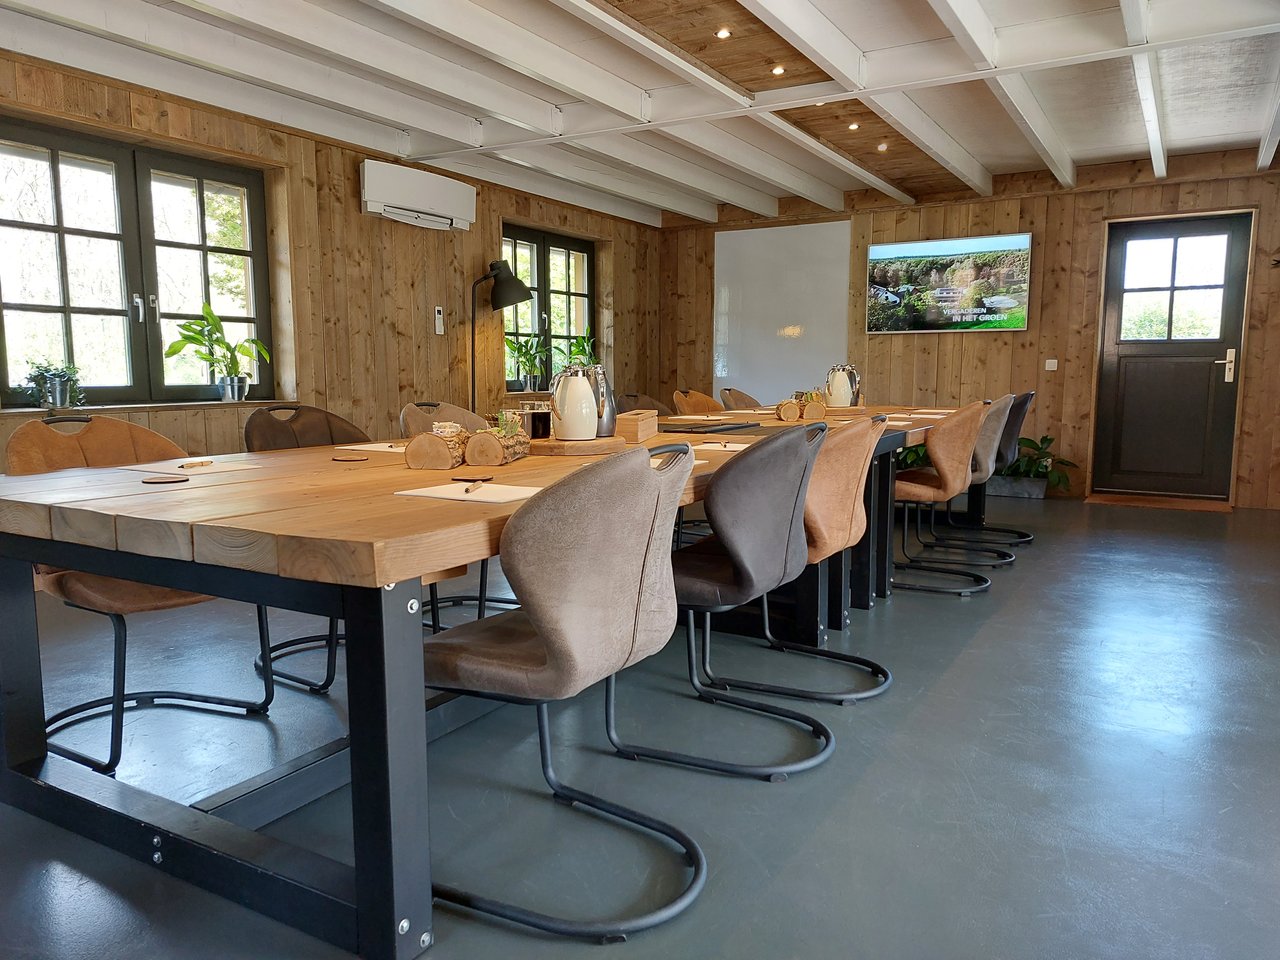 The Lodge, meetinglocation in the middle of nature - up to 14 people